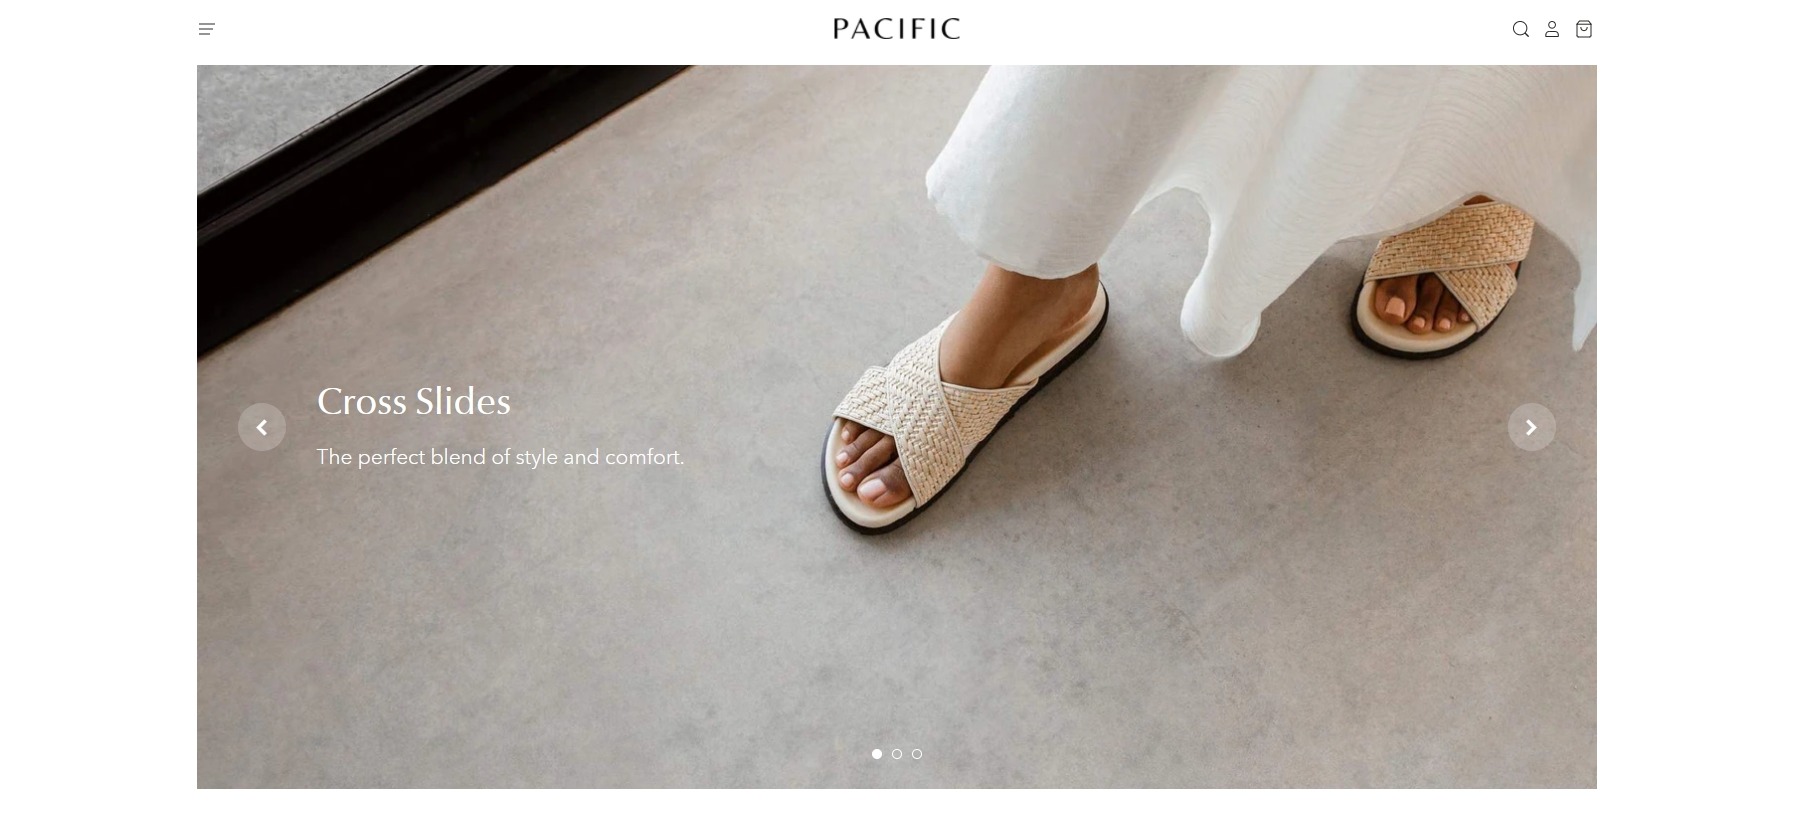 What is the Pacific theme for Shopify?